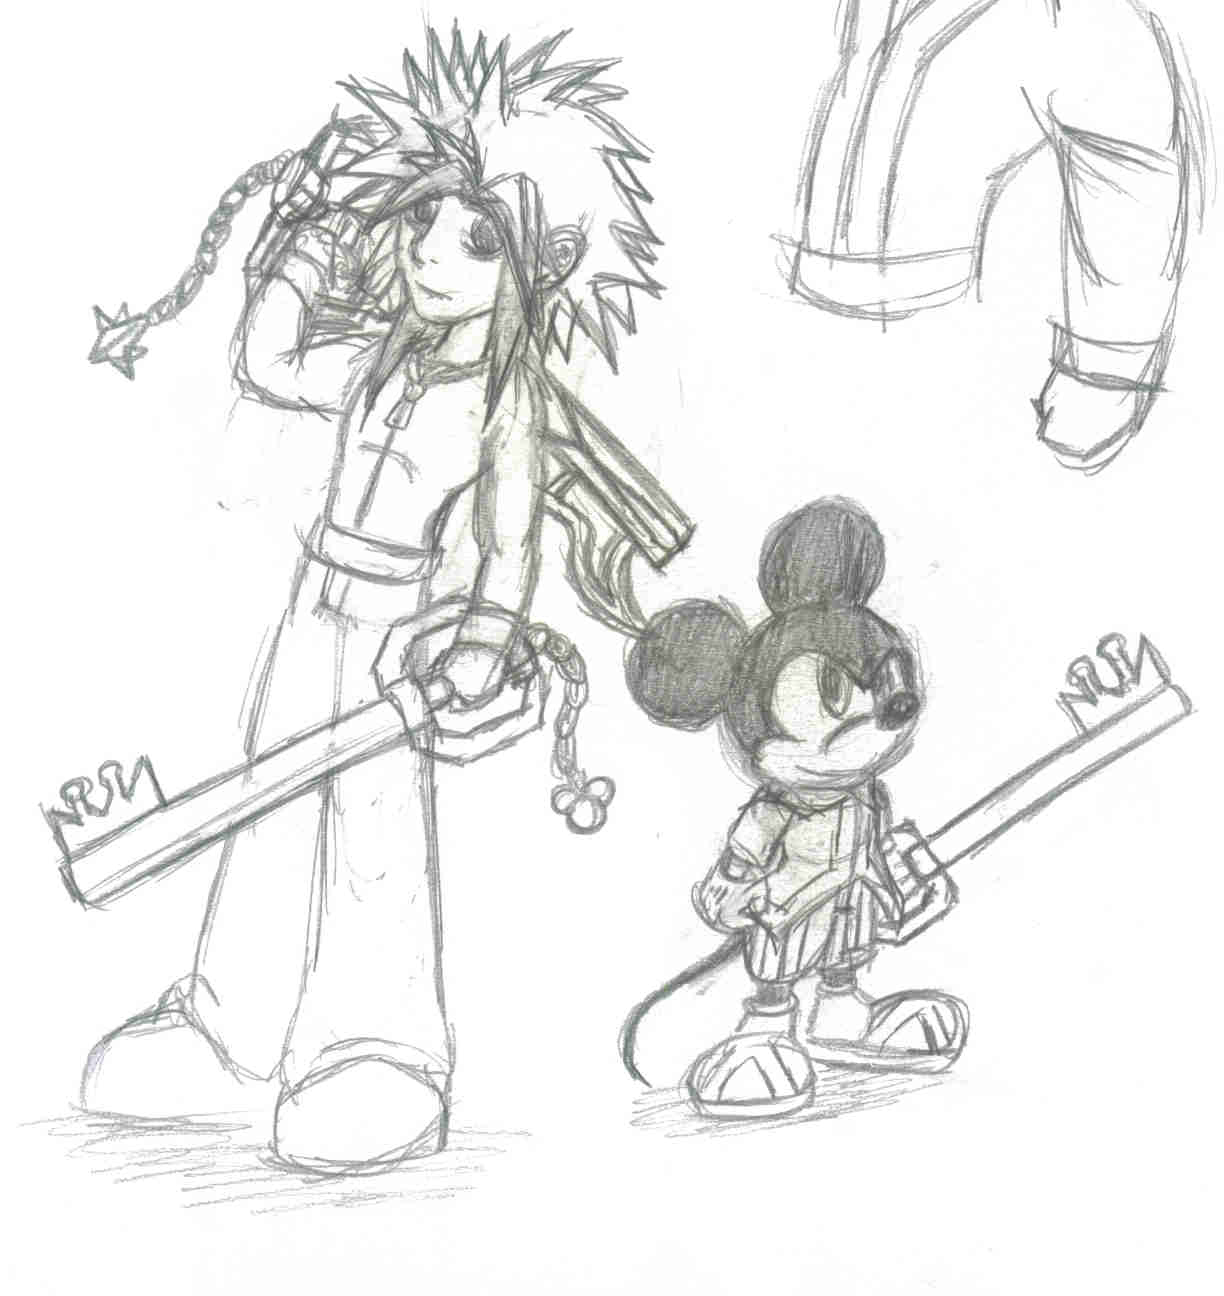 King Mickey and the new Kaybearer by The_Only_True_Warrior